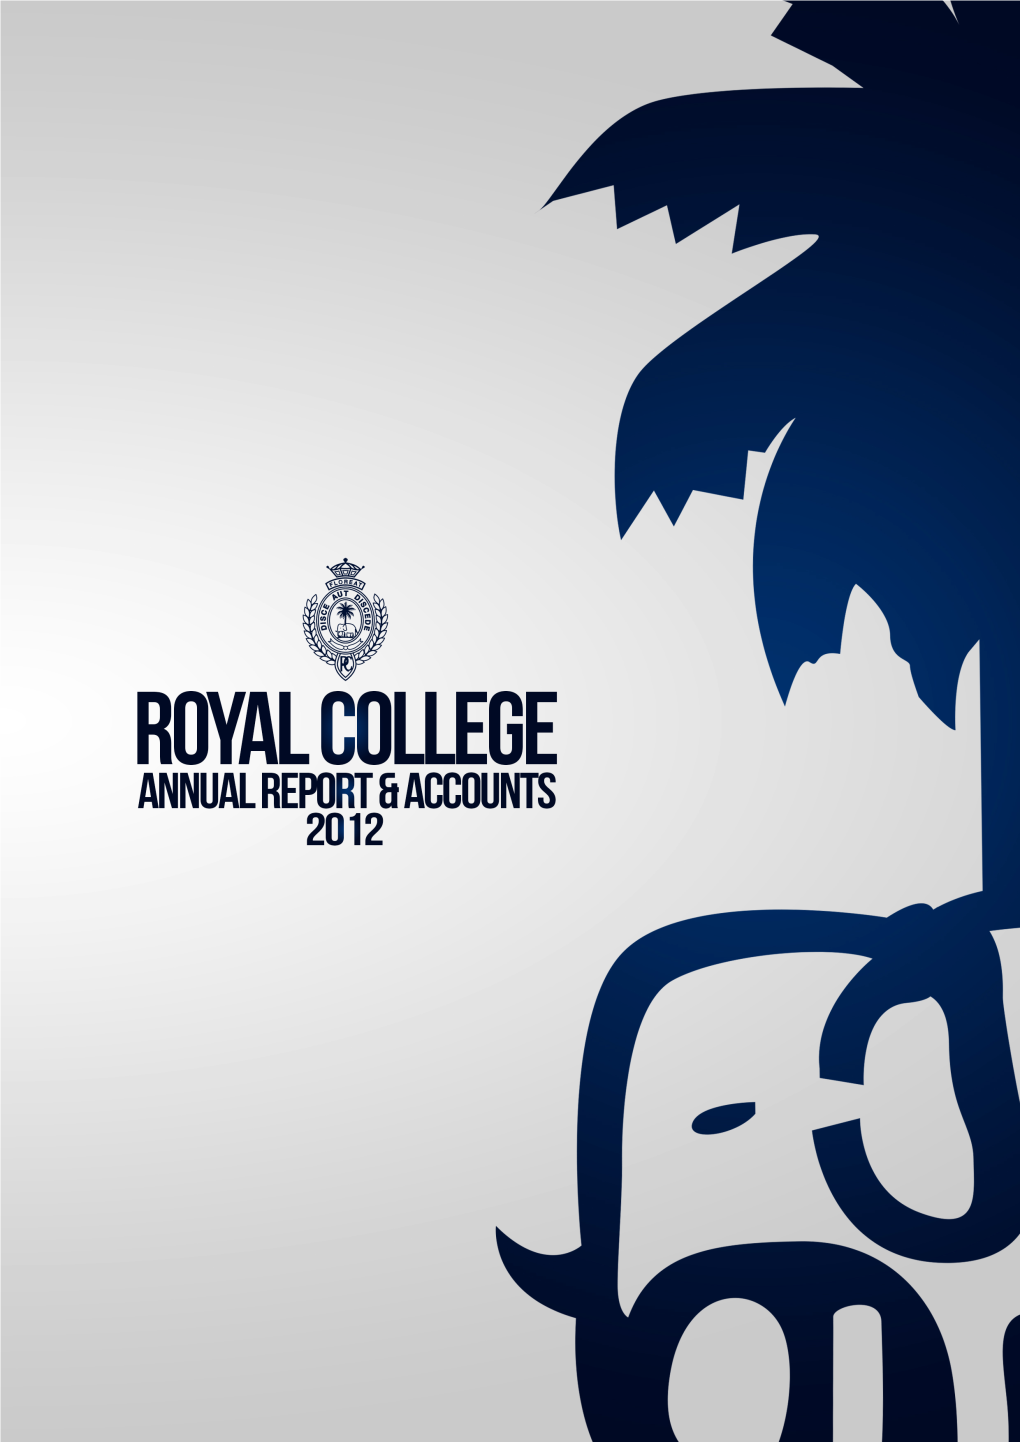 Royal College School Development Society Has Undoubtedly Achieved the Level of Expectation of Every Stakeholder in College